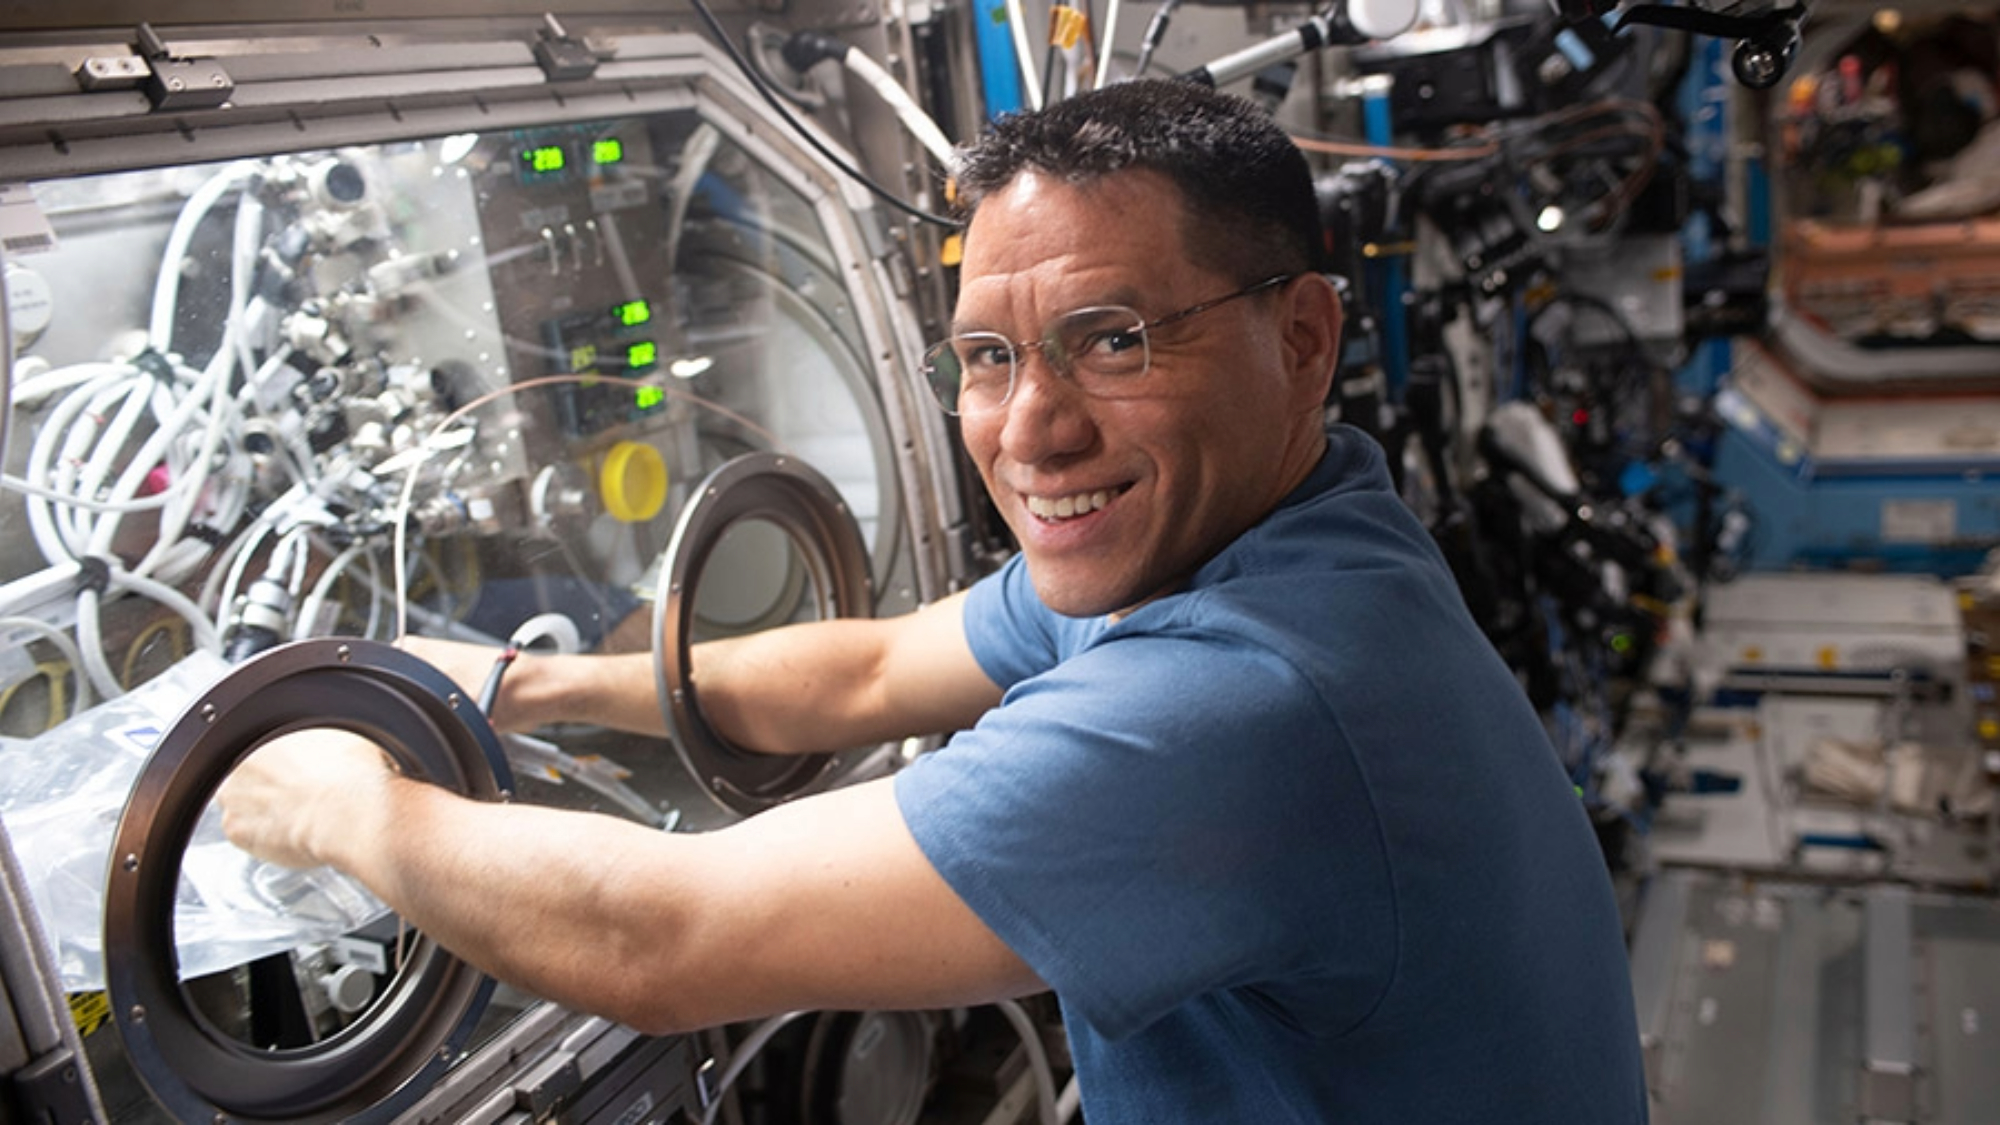 Astronaut Frank Rubio works in the Microgravity Science Glovebox swapping graphene aerogel samples for a space manufacturing study.